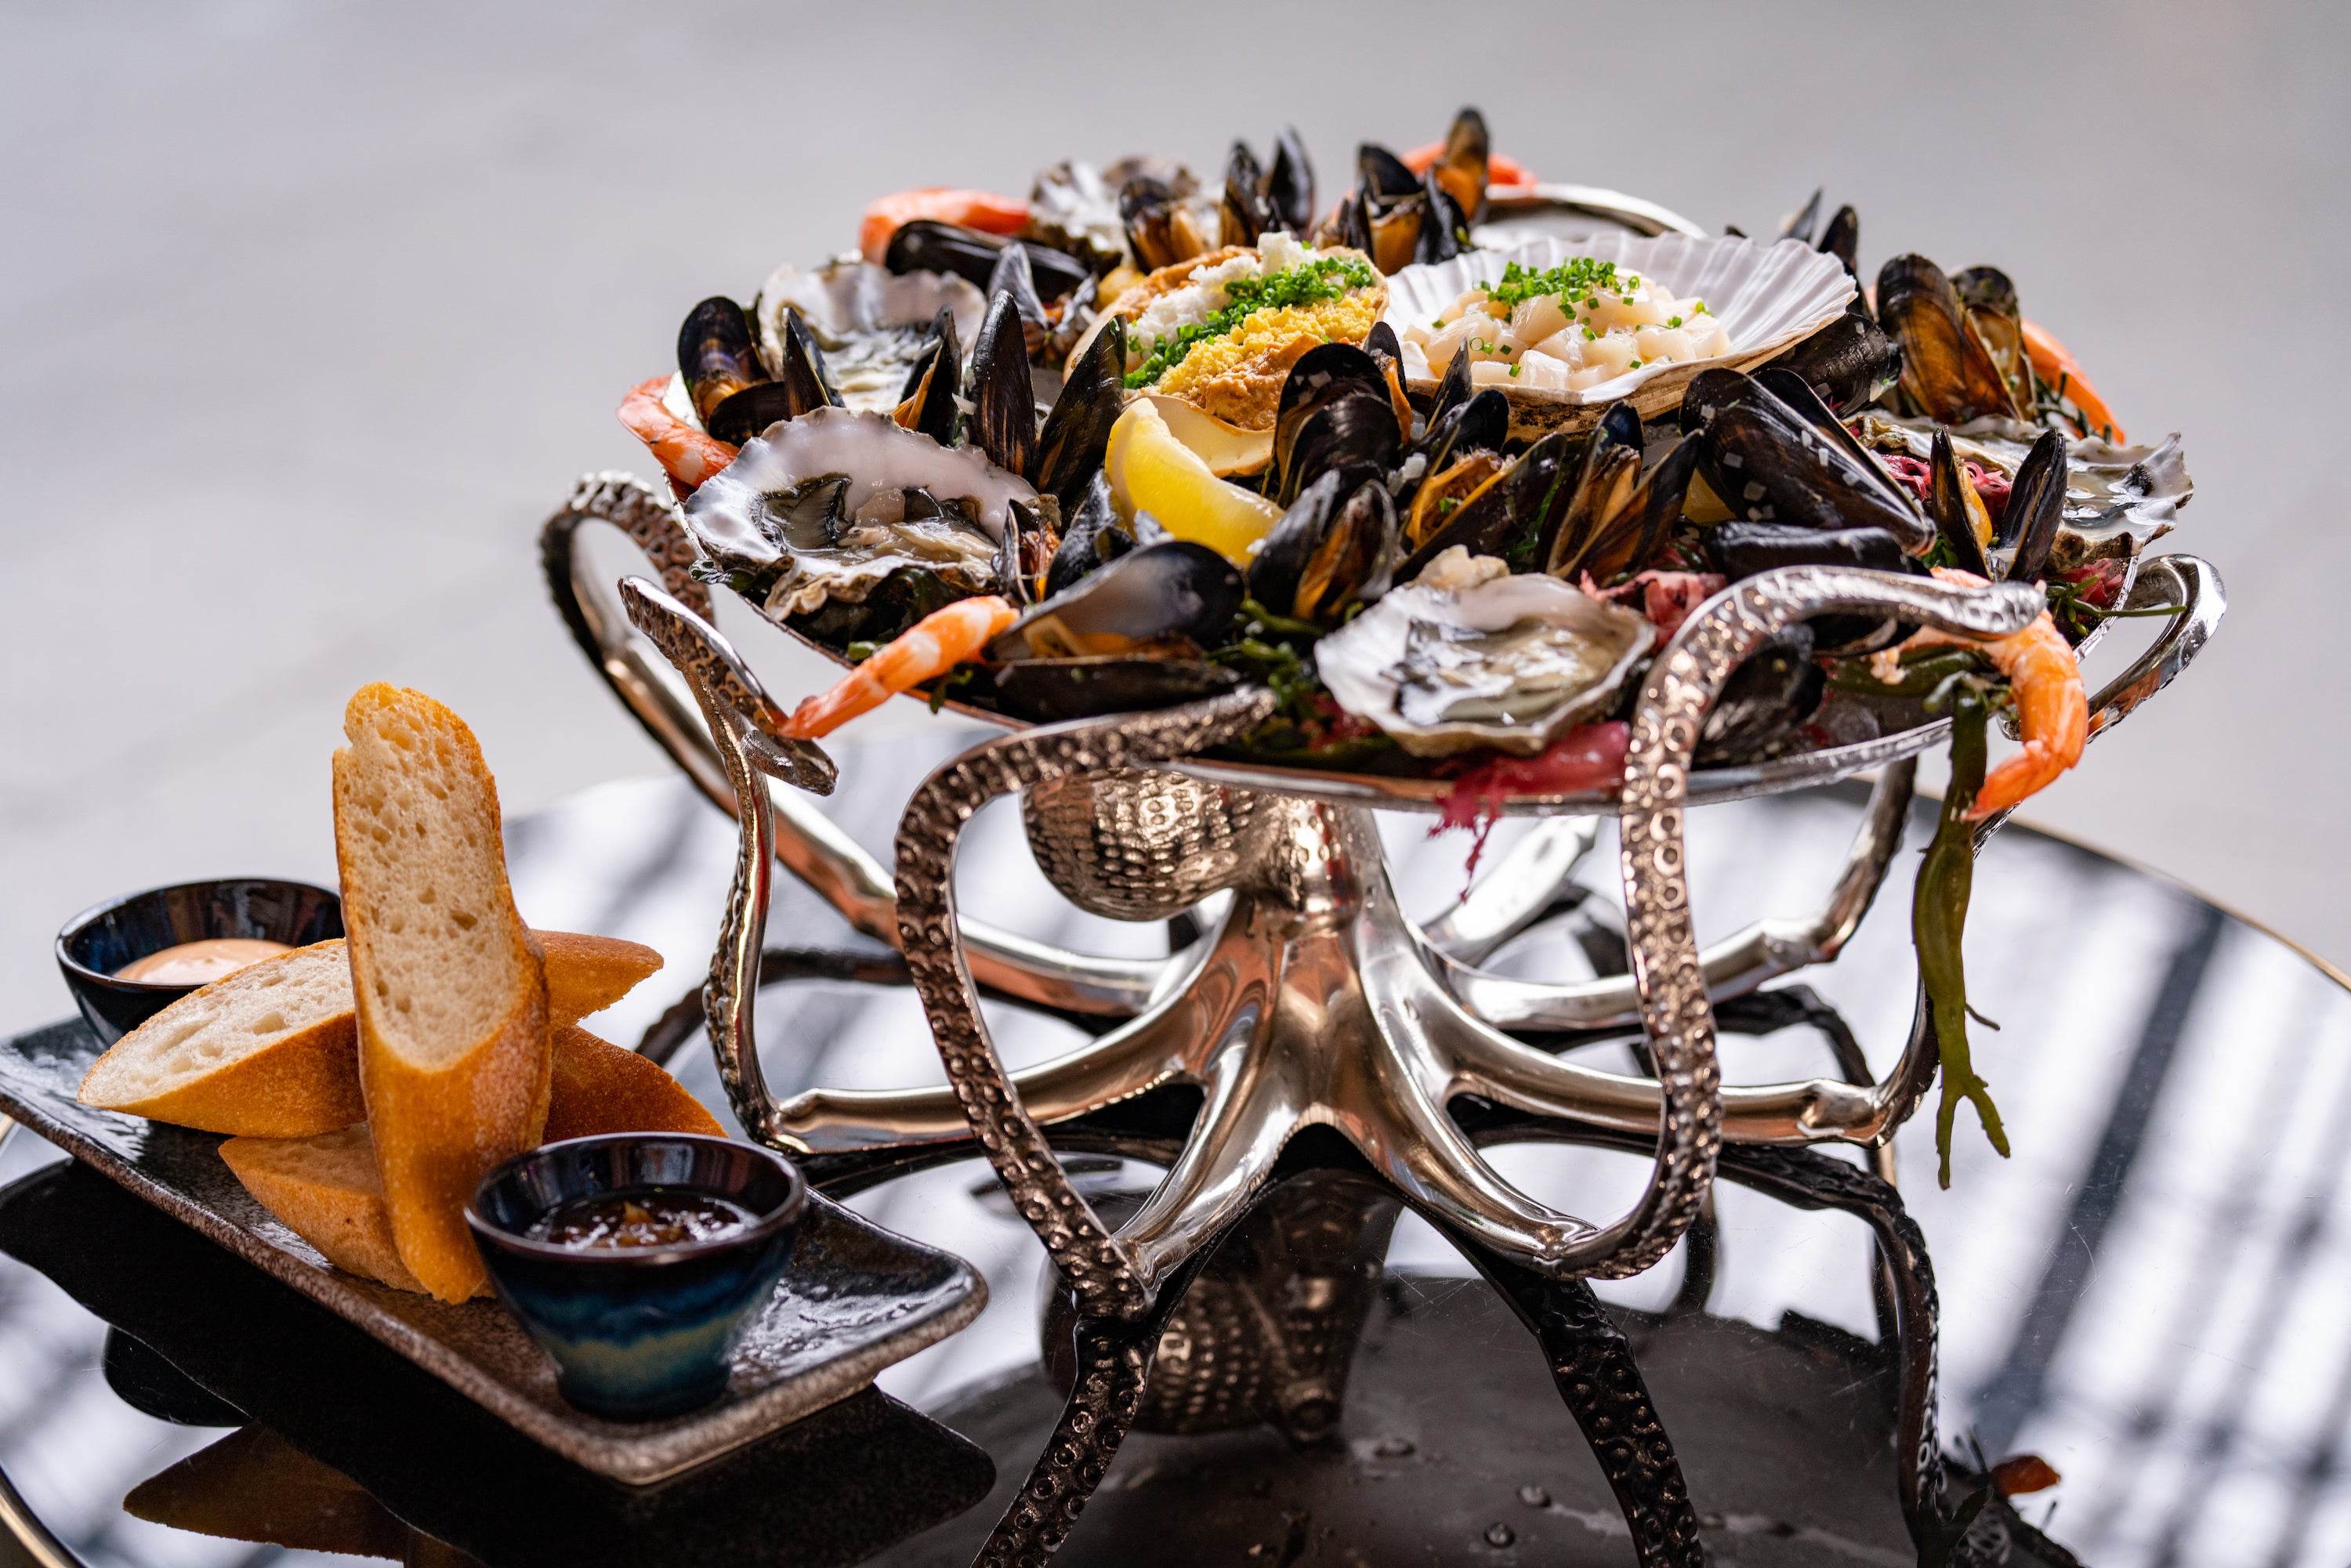 Indulge with Searcys’ new seafood platter